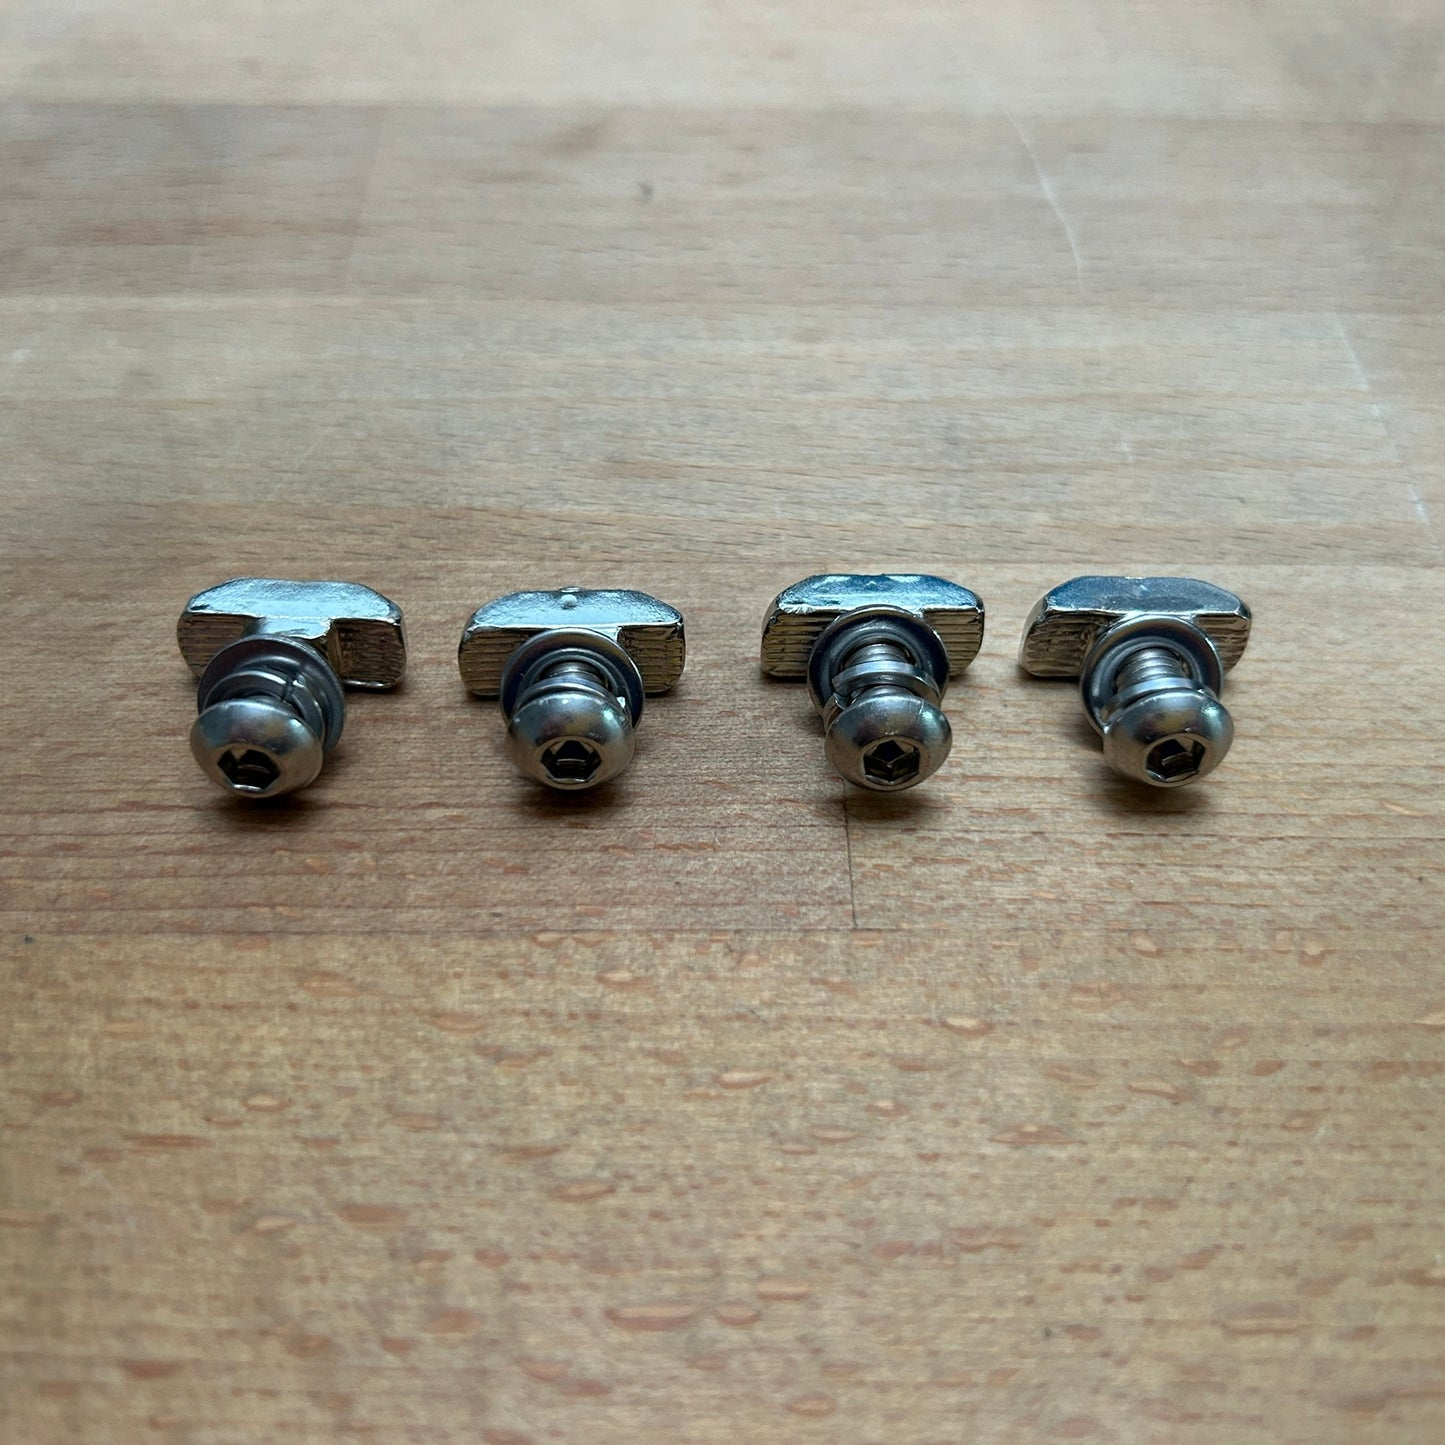 Replacement Hardware Kit for GX Basecamp Brackets